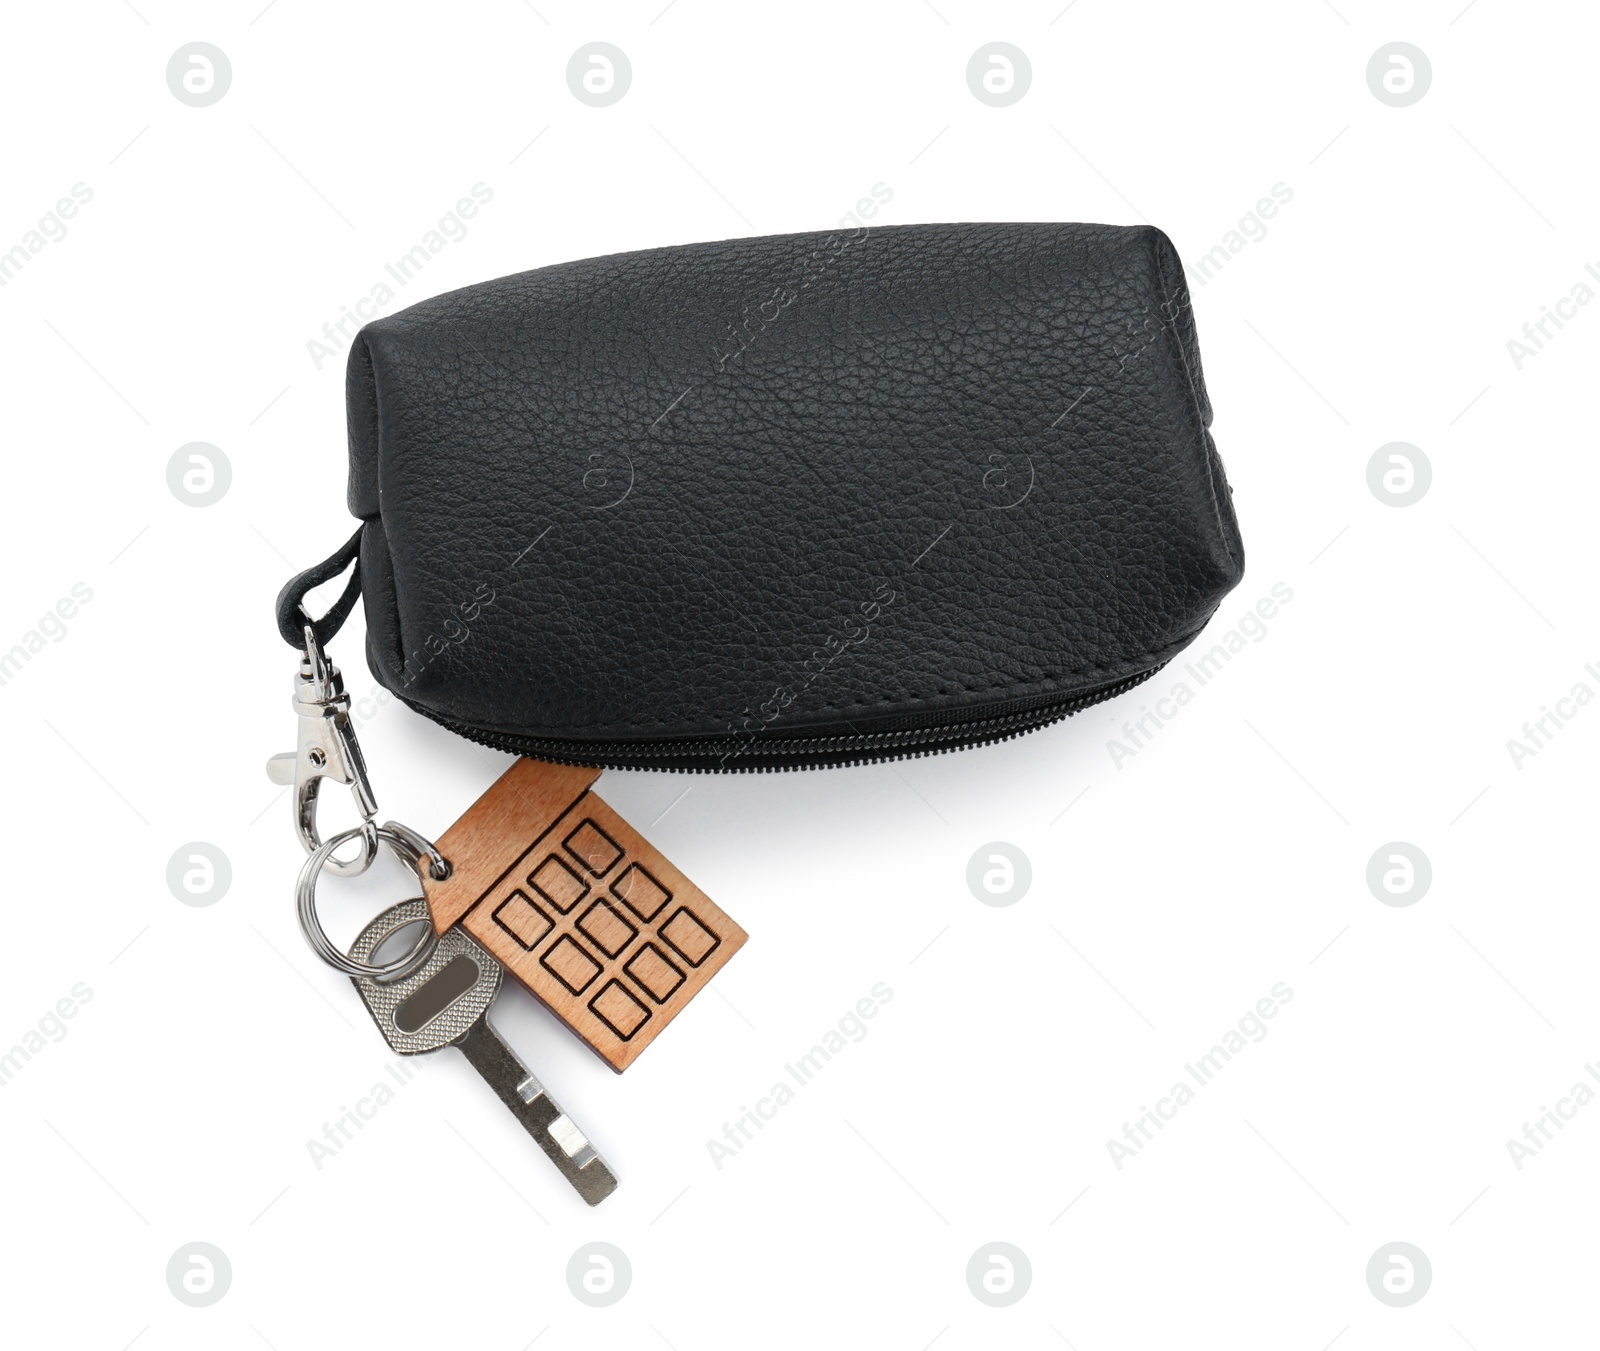 Photo of Leather case with key isolated on white, top view